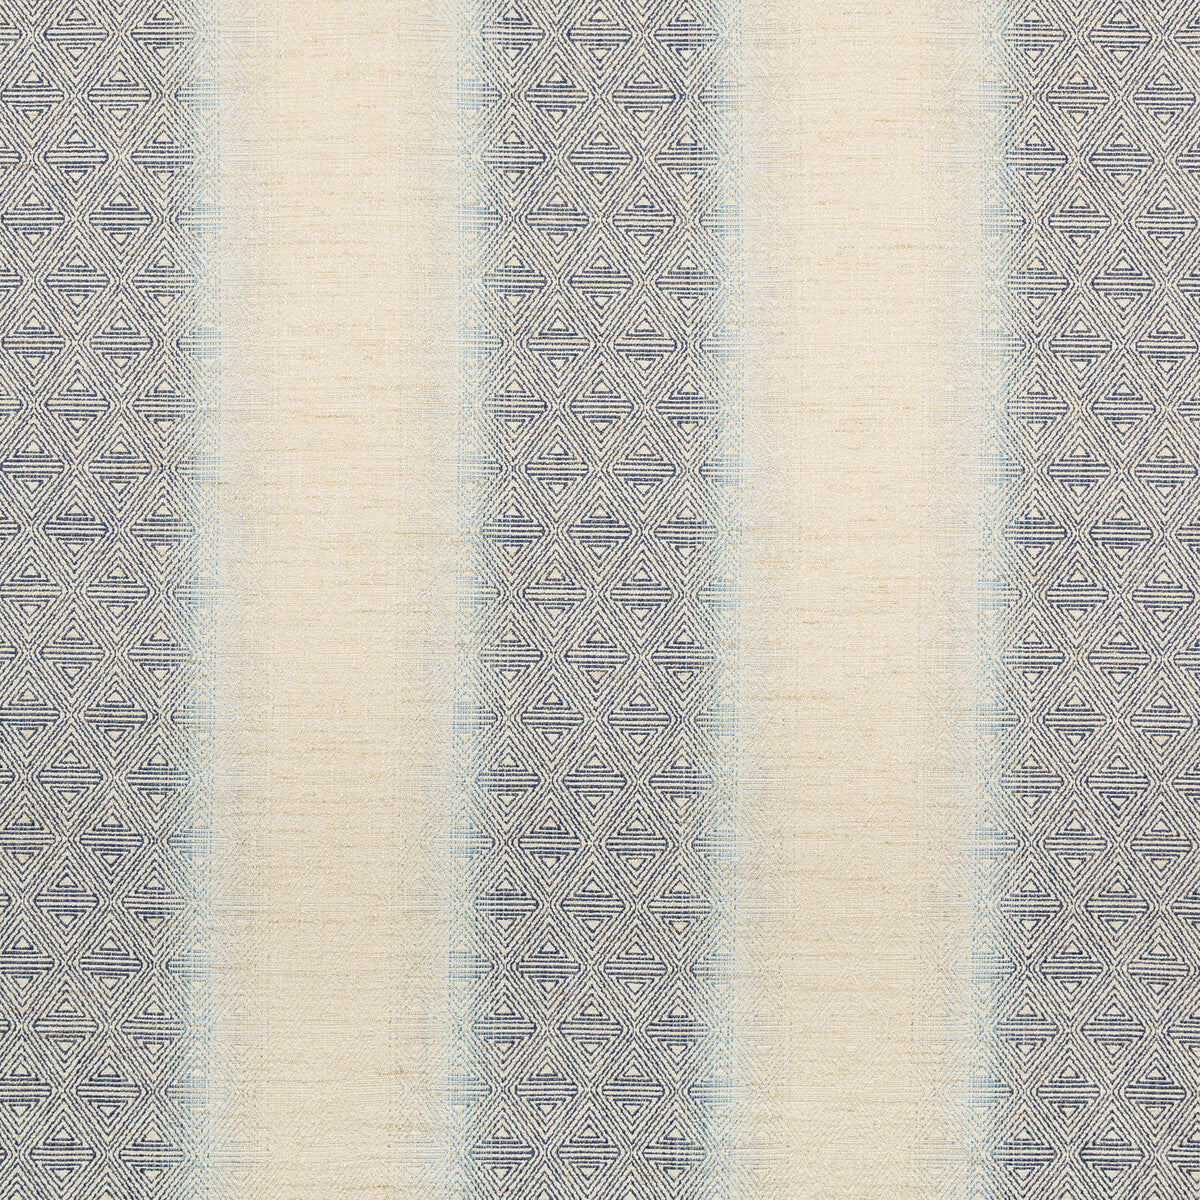 Tulum fabric in ocean color - pattern 35556.5.0 - by Kravet Couture in the Modern Colors-Sojourn Collection collection